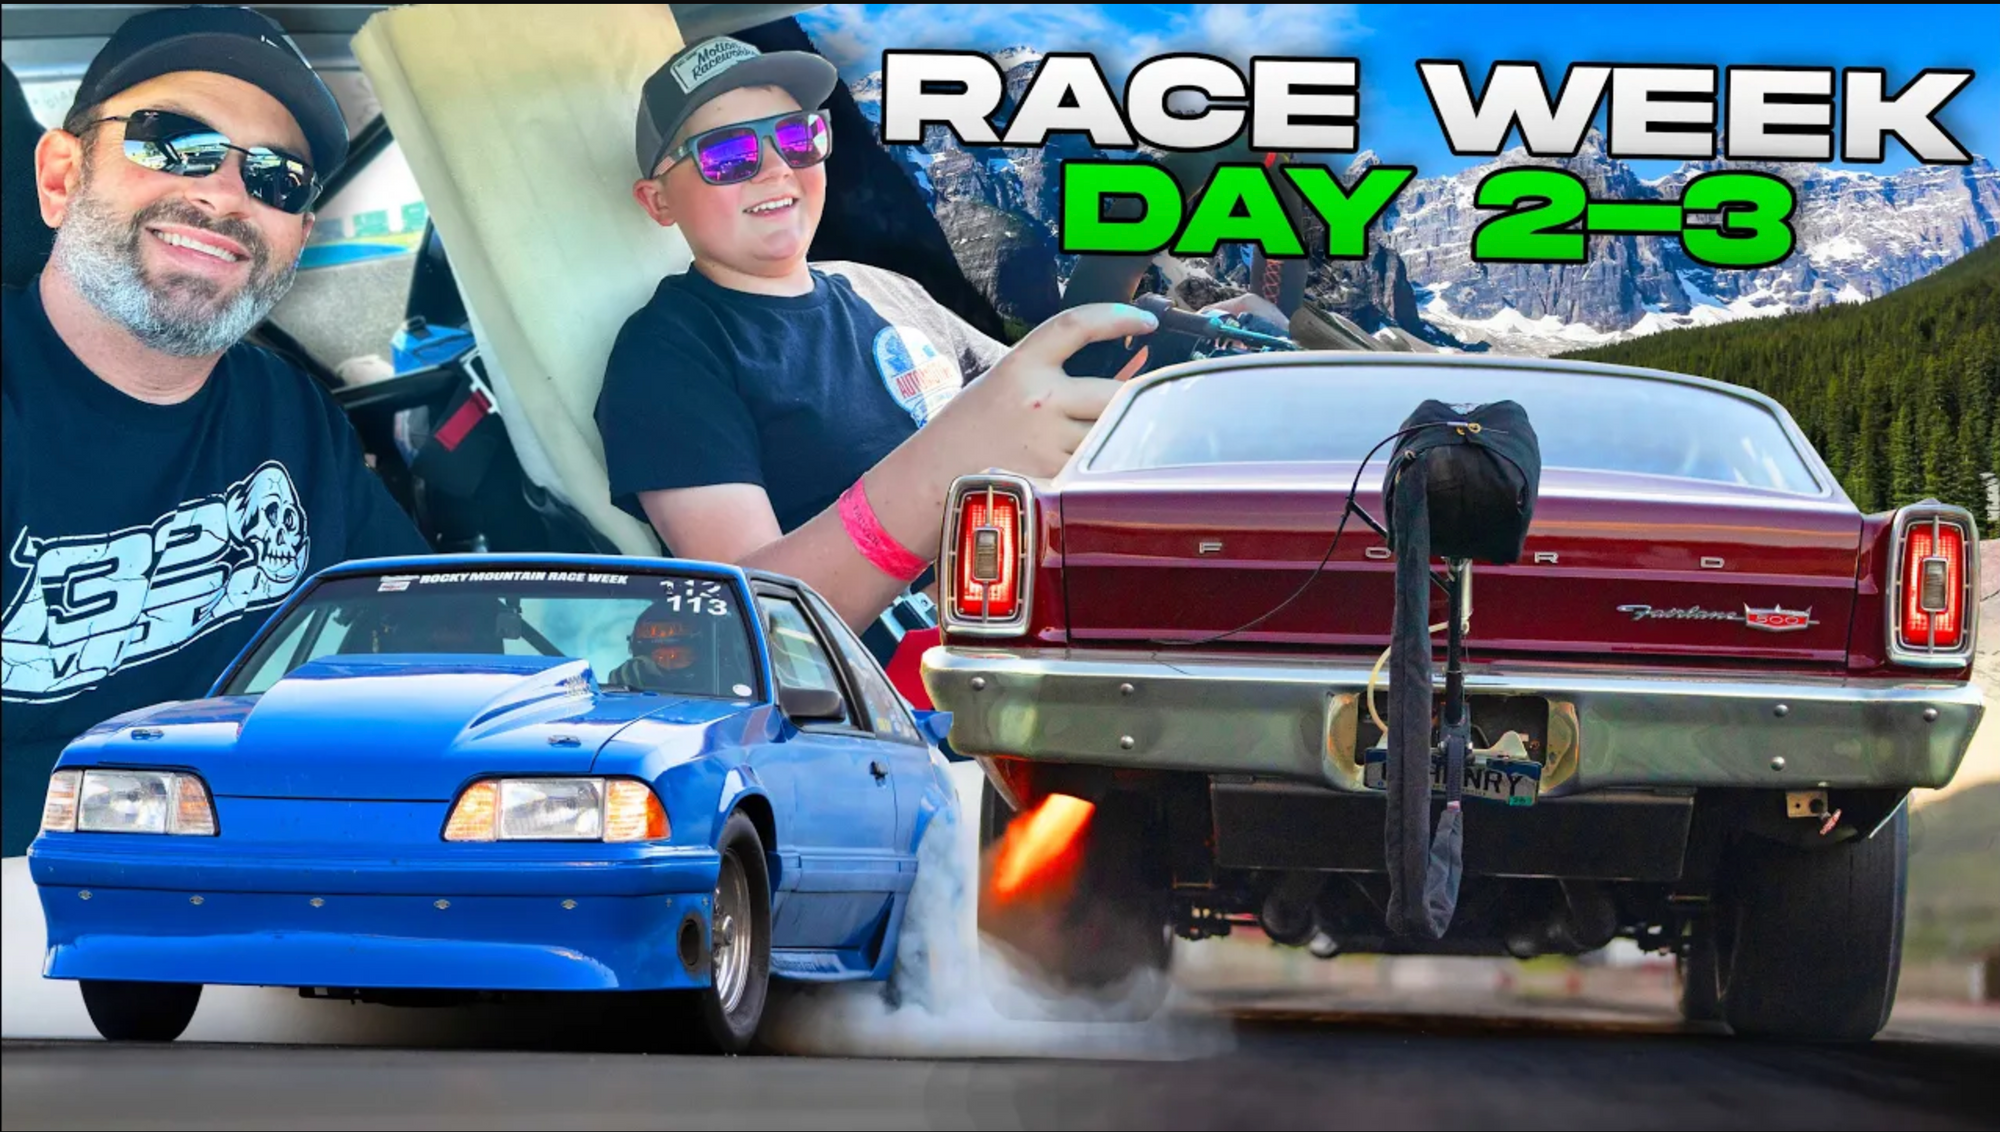 15 year old drives 1200HP Mustang + Stick Shift cars BATTLE for 1st place! | Race Week Day 2-3